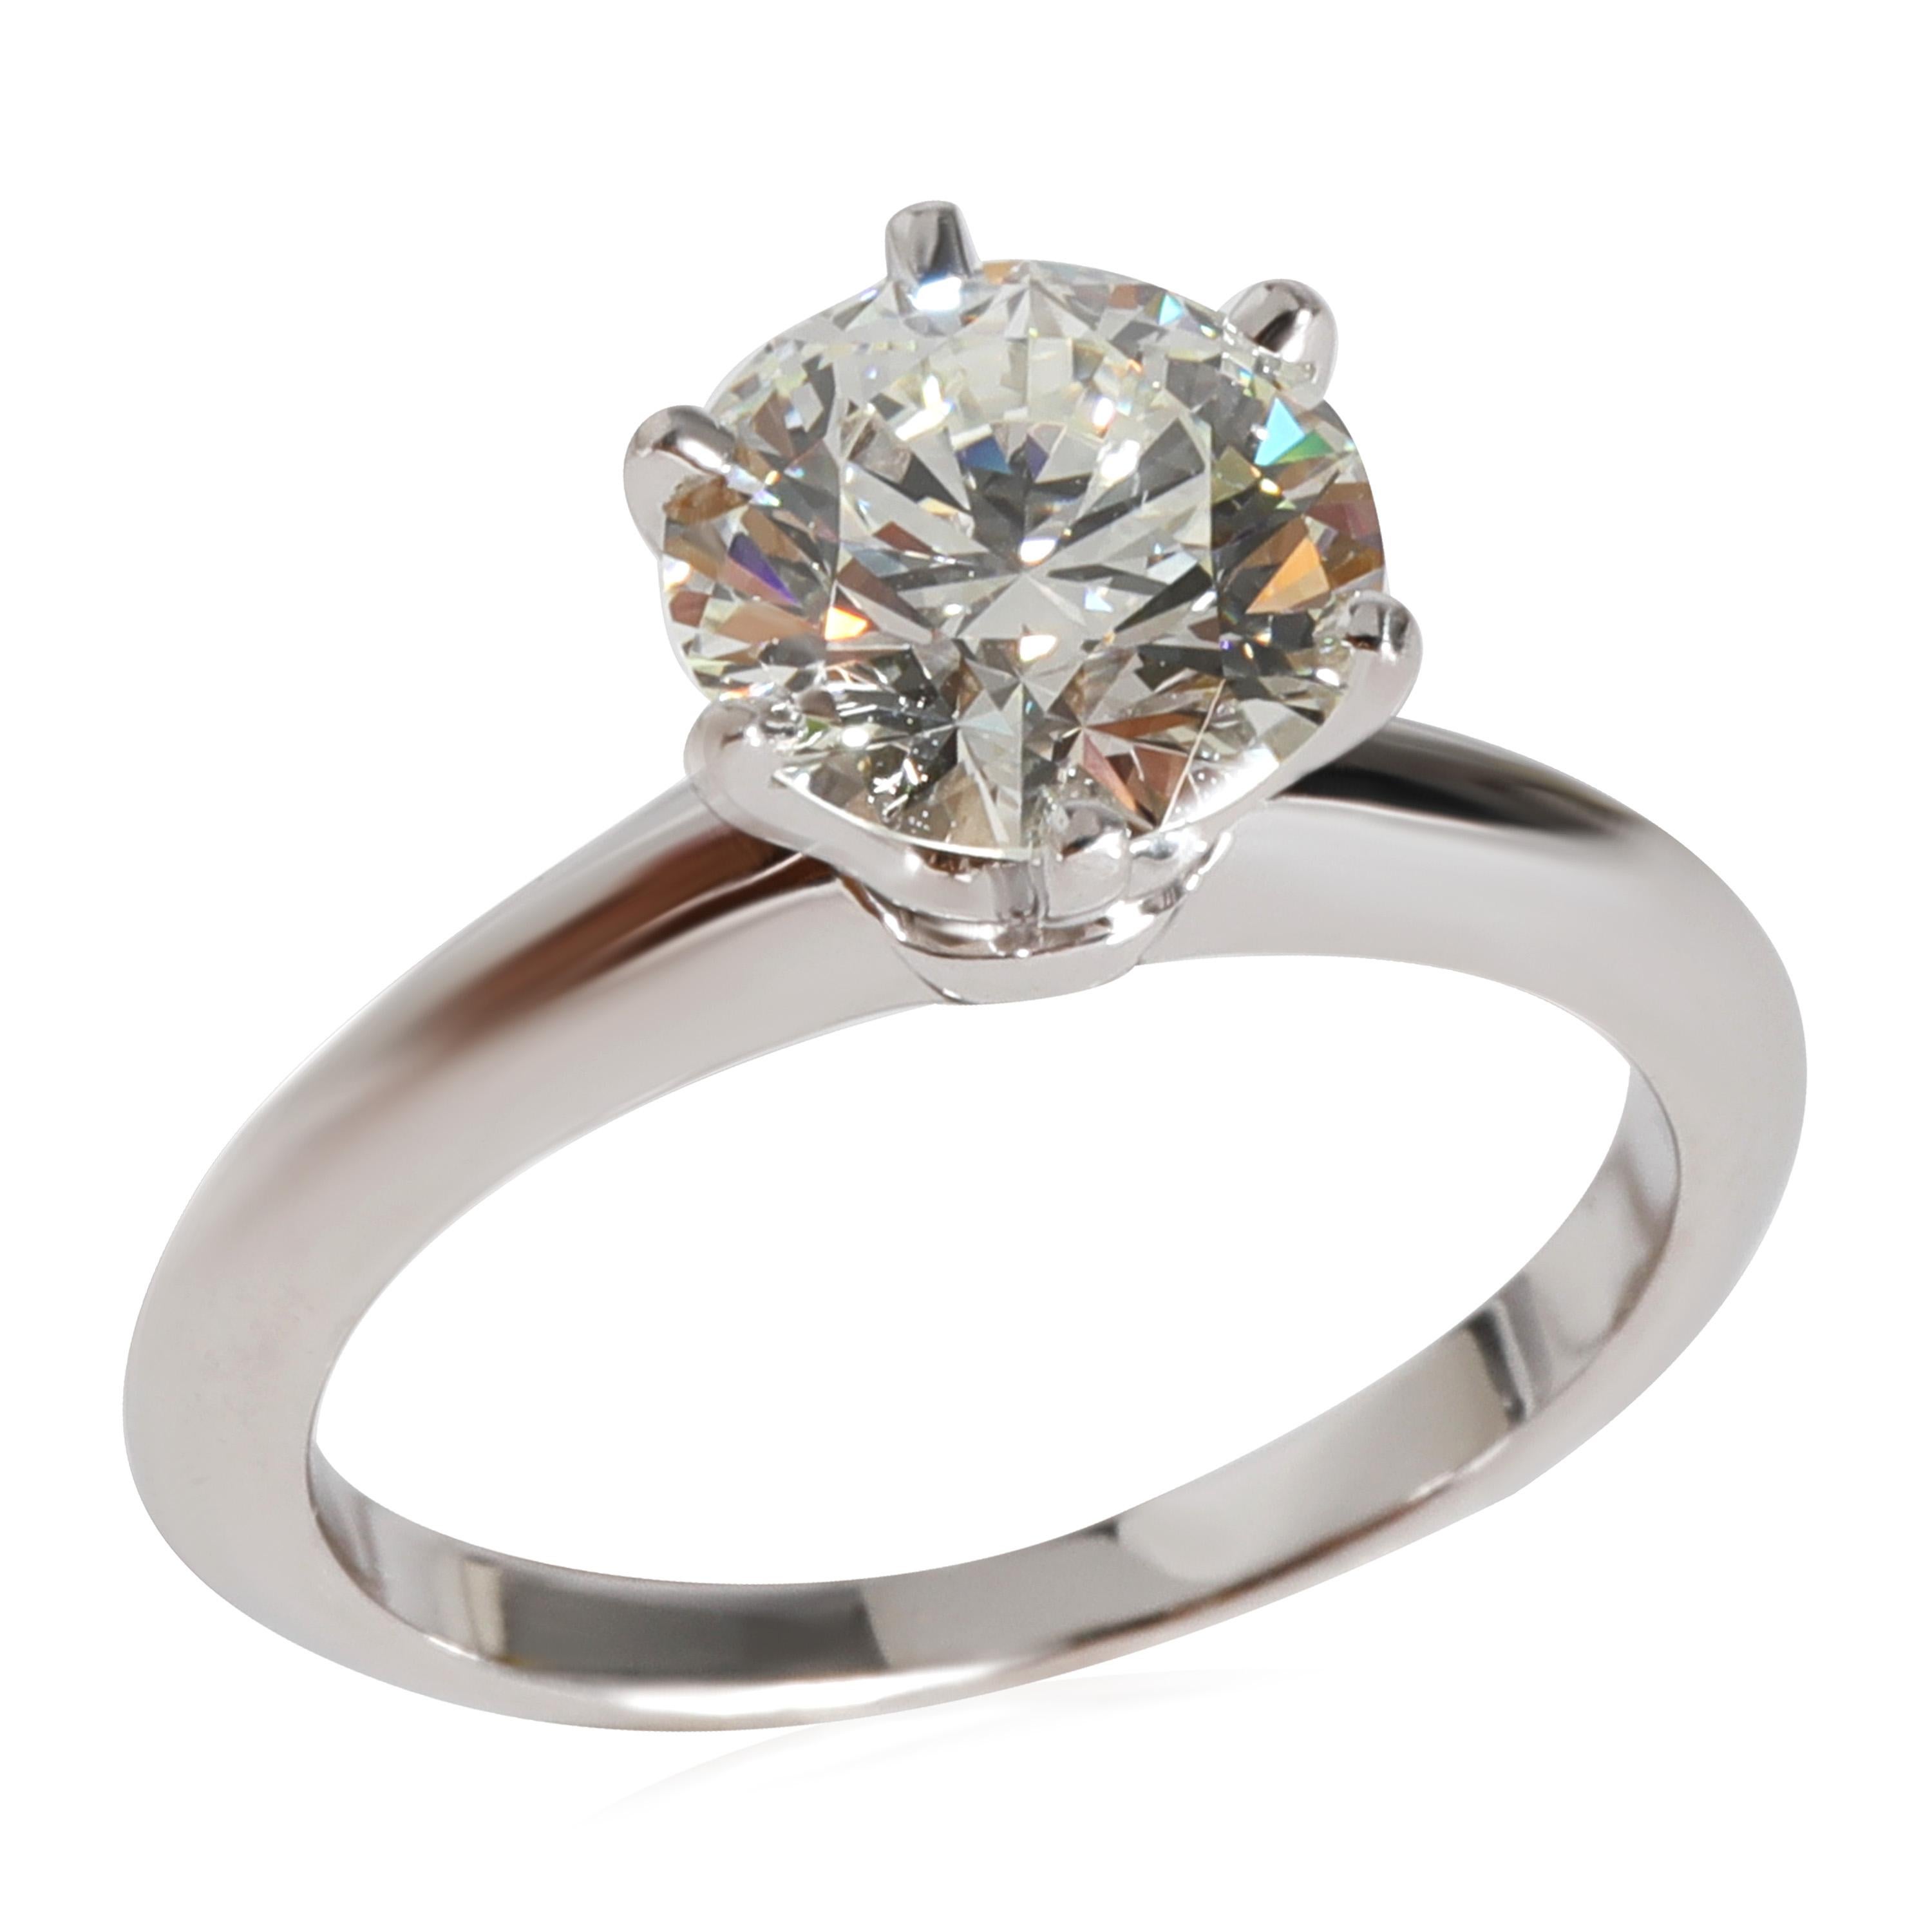 Tiffany & Co. Diamond Solitaire Engagement Ring in Platinum H VS1 1.53 CT

PRIMARY DETAILS
SKU: 122702
Listing Title: Tiffany & Co. Diamond Solitaire Engagement Ring in Platinum H VS1 1.53 CT
Condition Description: Retails for 29600 USD. In